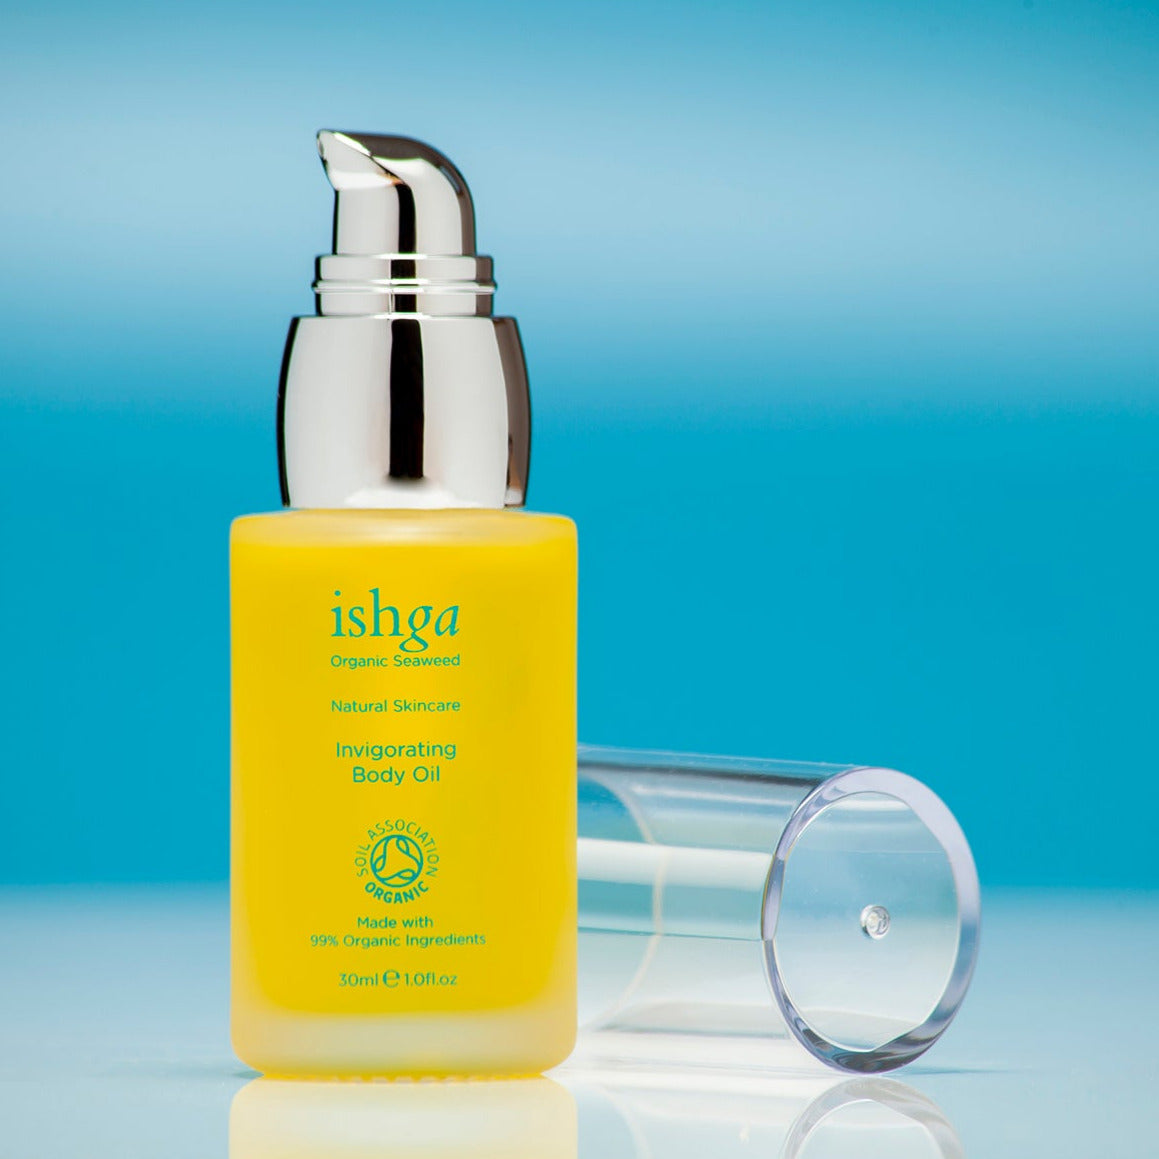 Glass bottle of ishga Invigorating Body Oil with its lid next to it